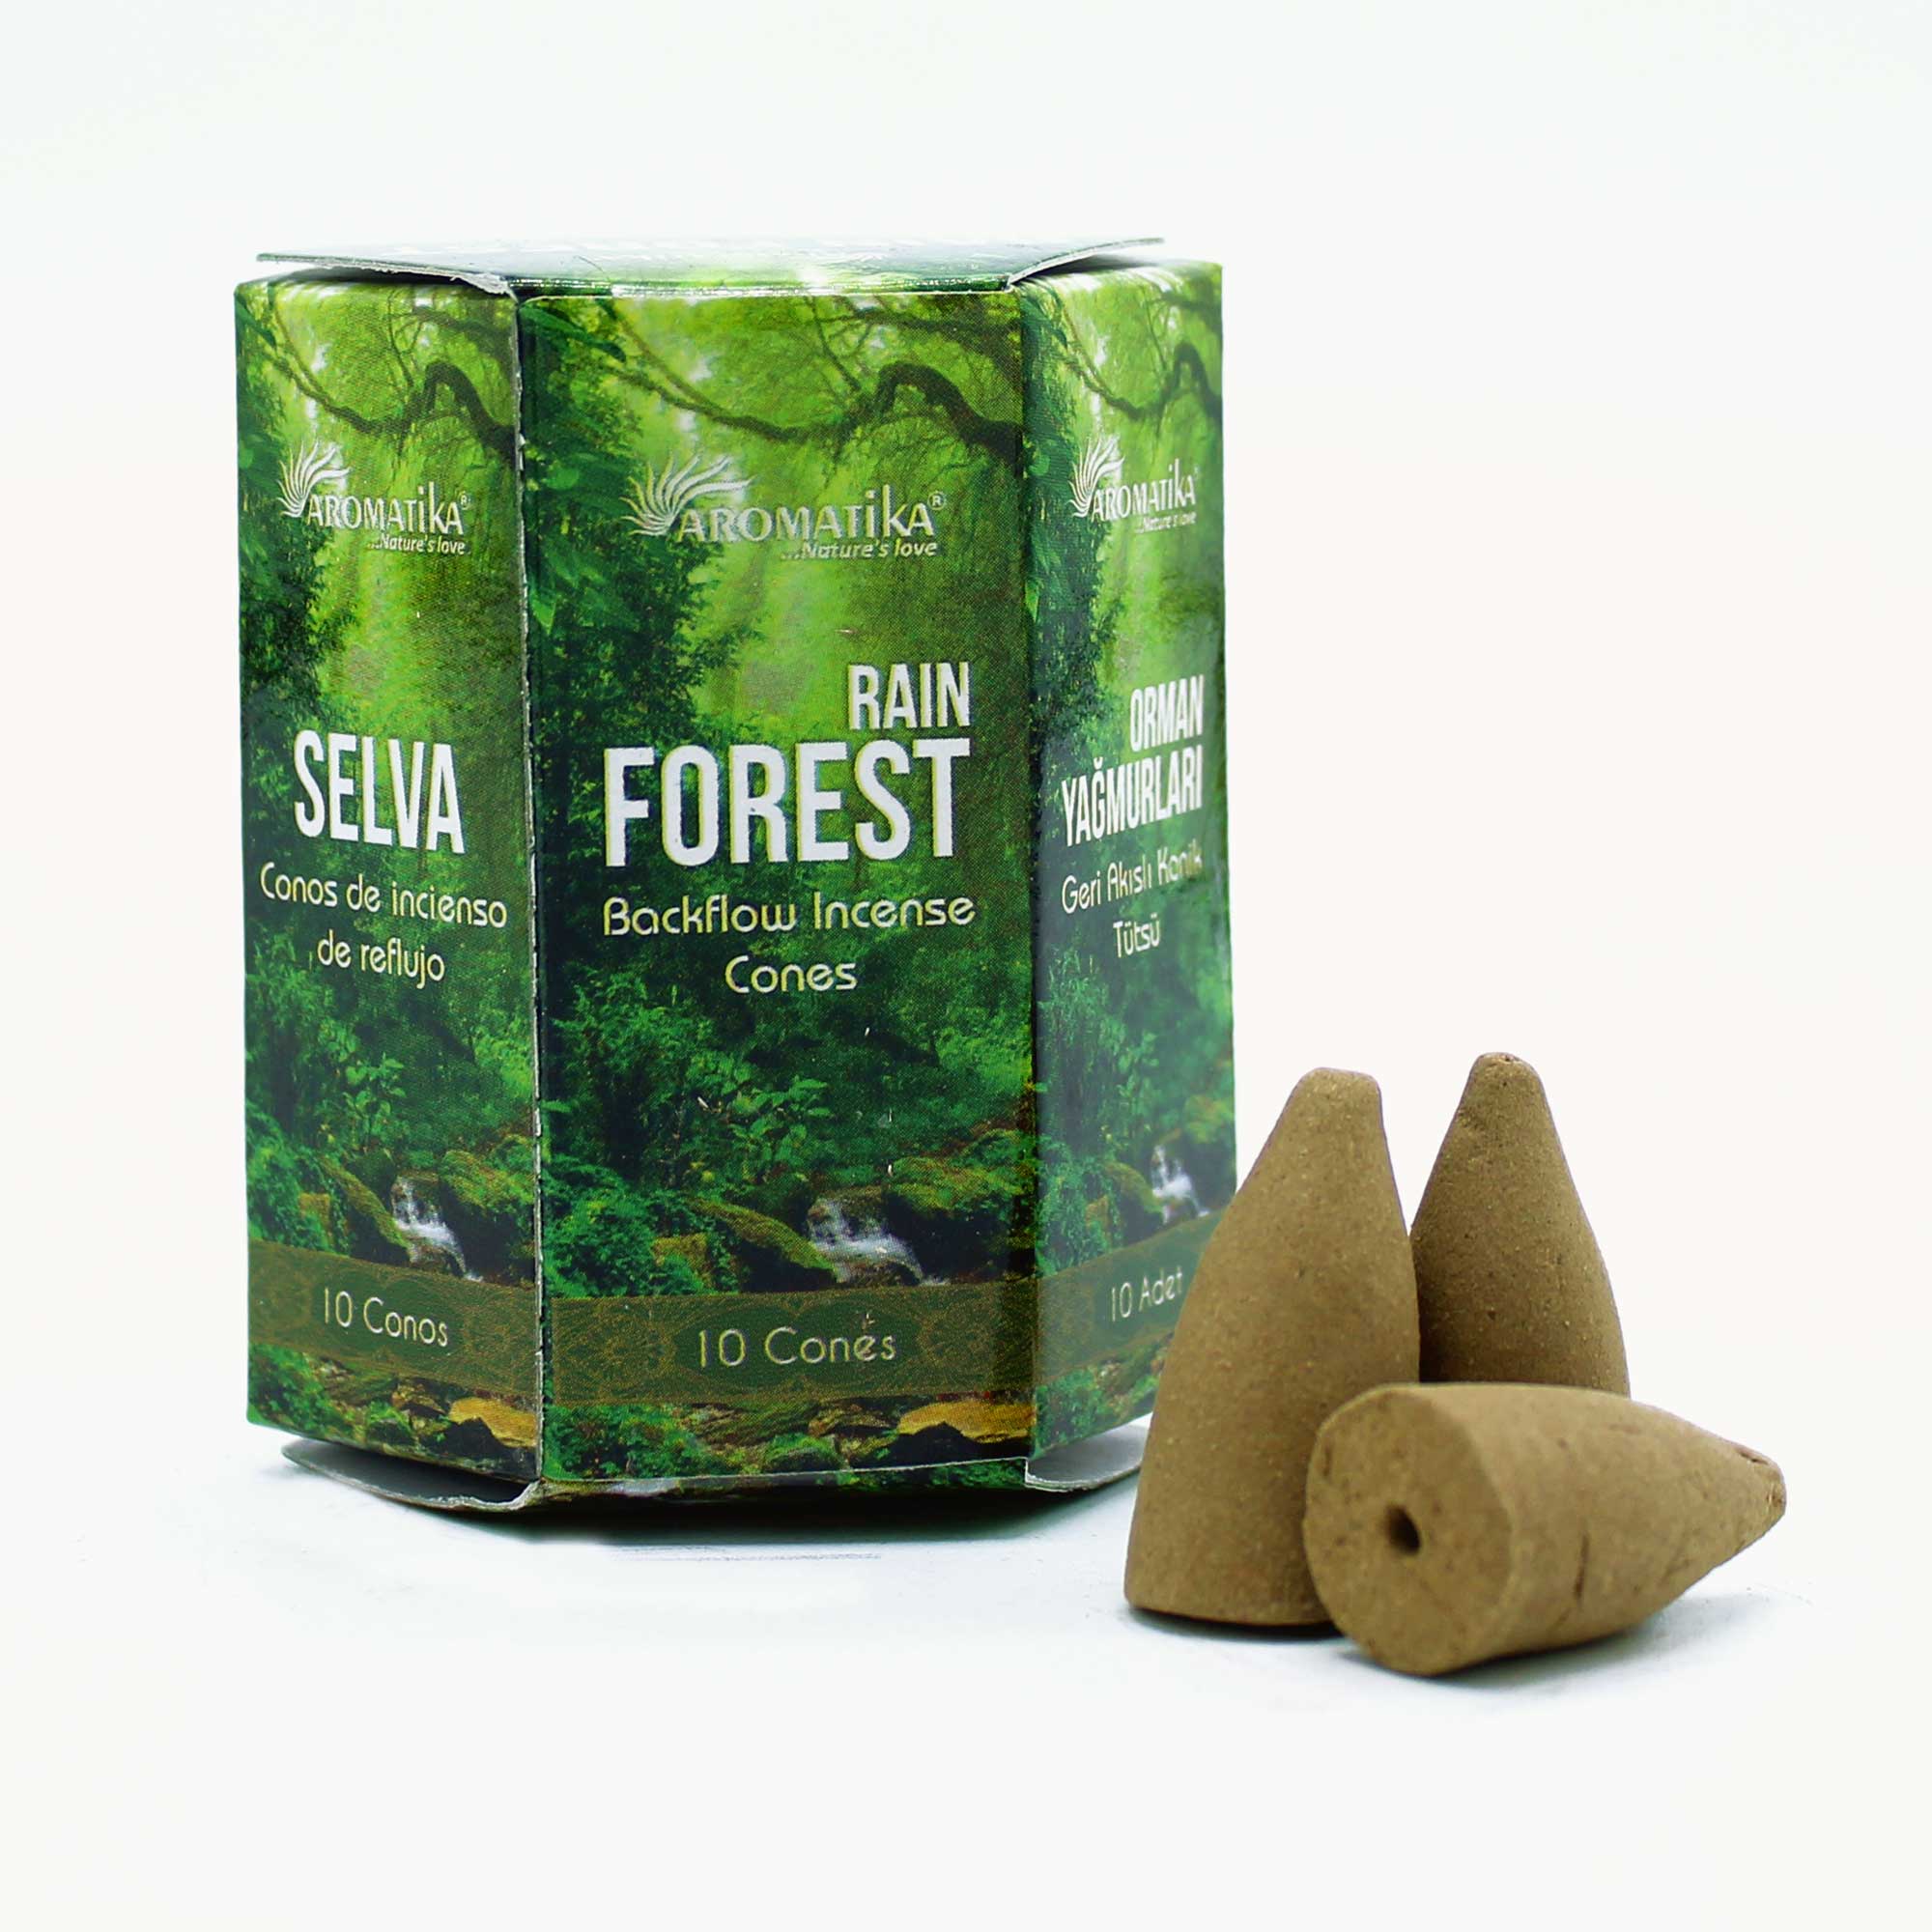 3 x Packs of 10 Masala Backflow Incense Cones - Rain Forest